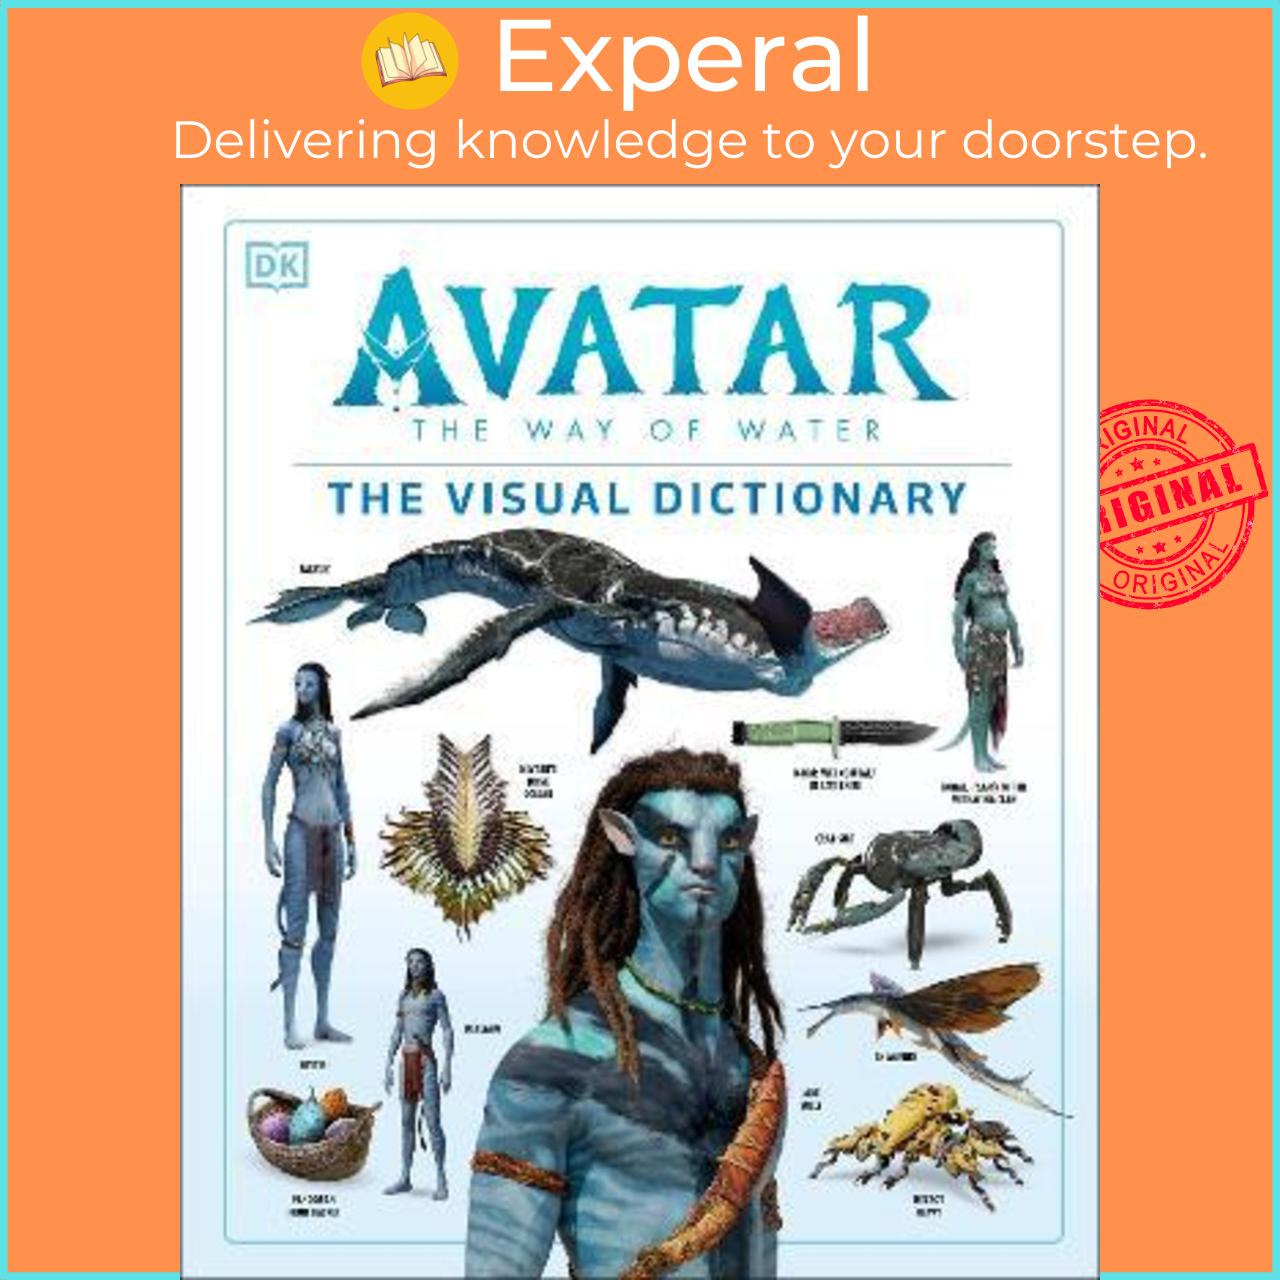 Sách - Avatar The Way of Water The Visual Dictionary by Joshua Izzo (UK edition, hardcover)